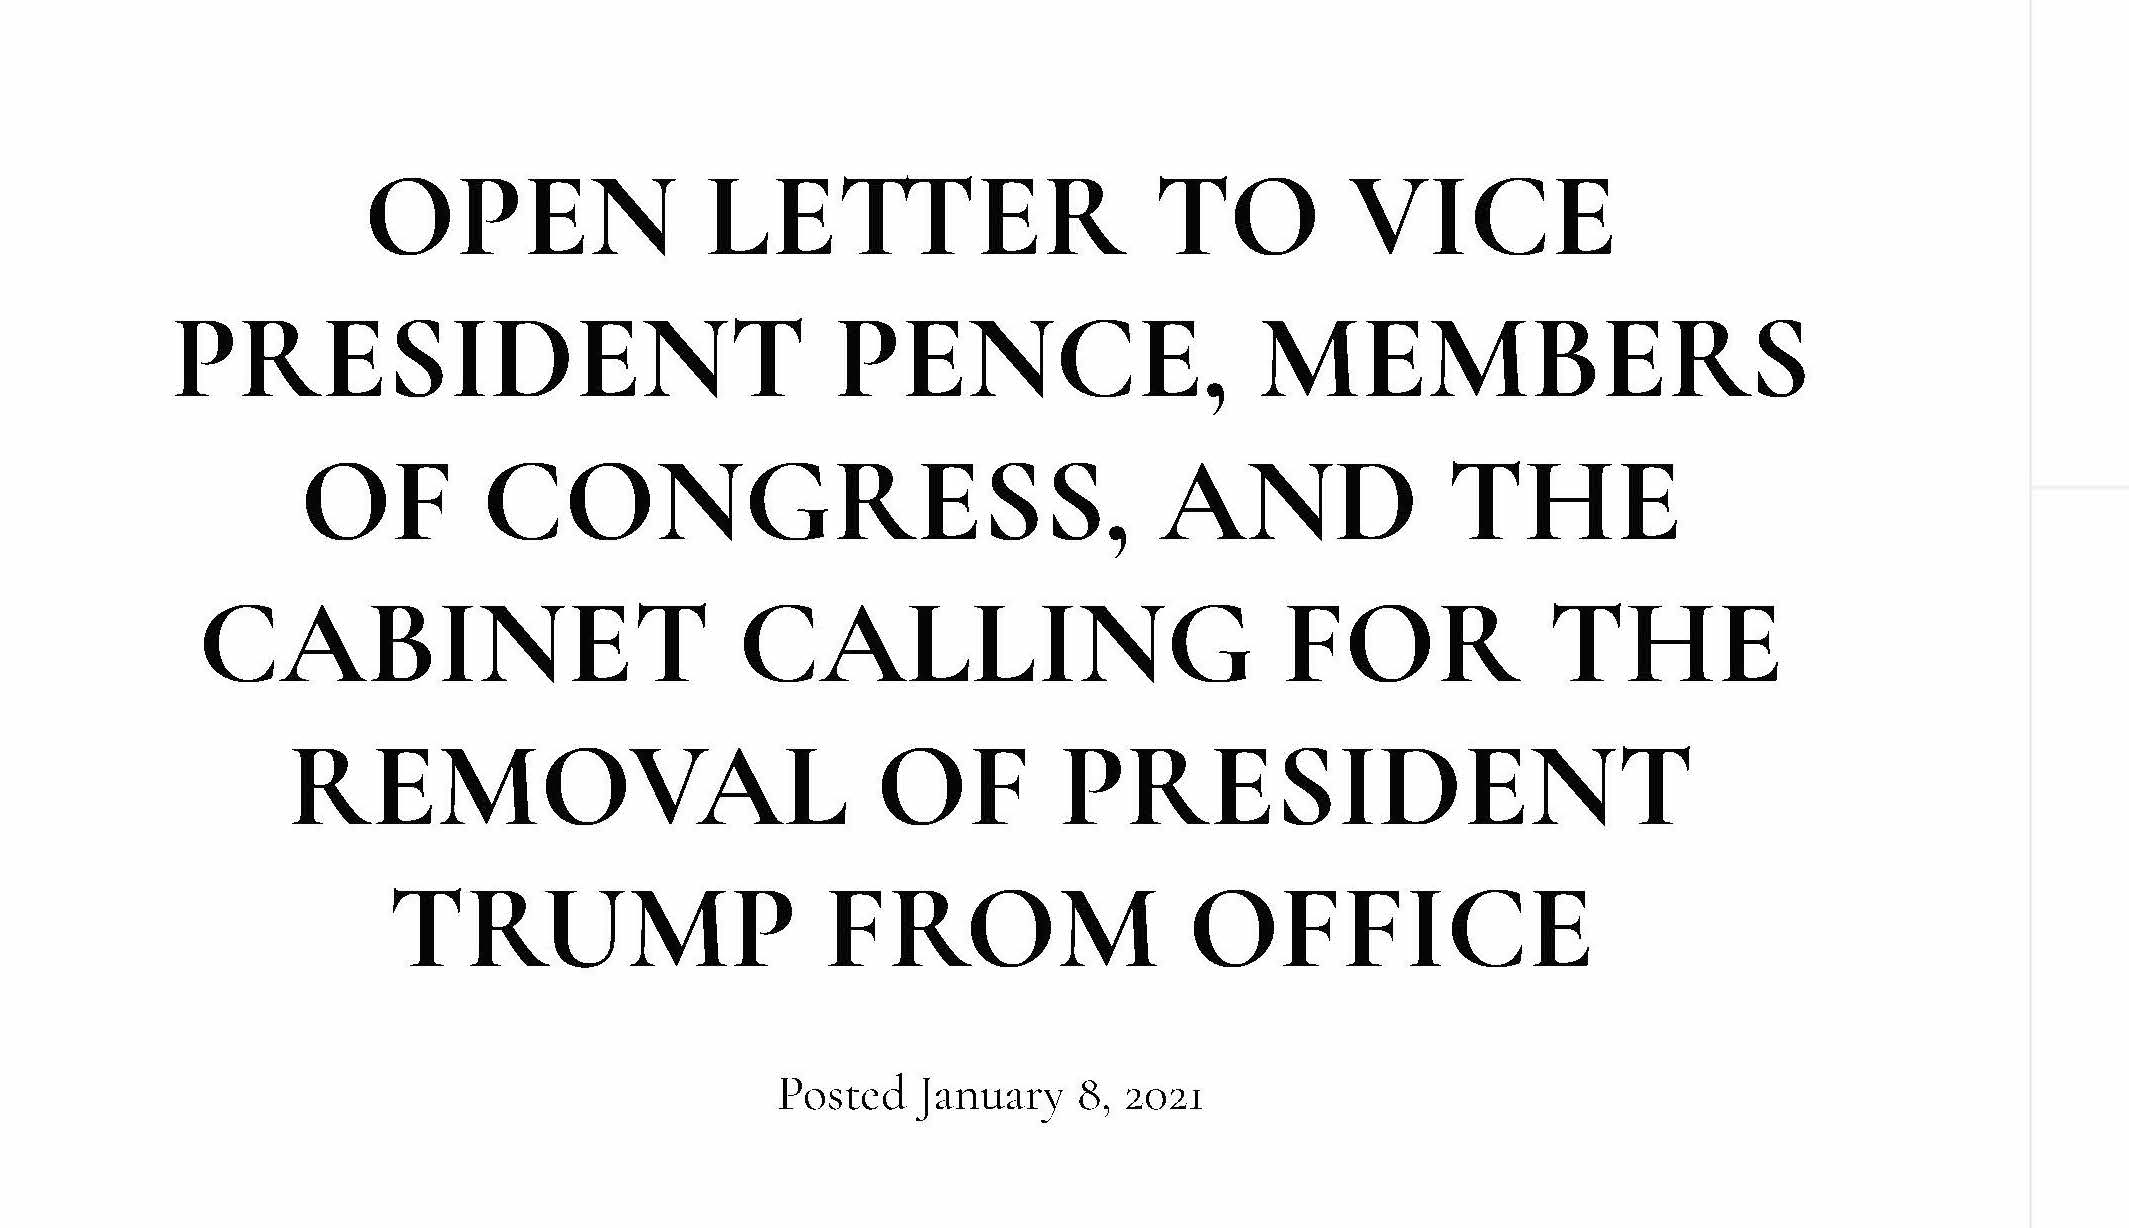 OPEN LETTER TO VICE PRESIDENT PENCE, MEMBERS OF CONGRESS, AND THE CABINET CALLING FOR THE REMOVAL OF